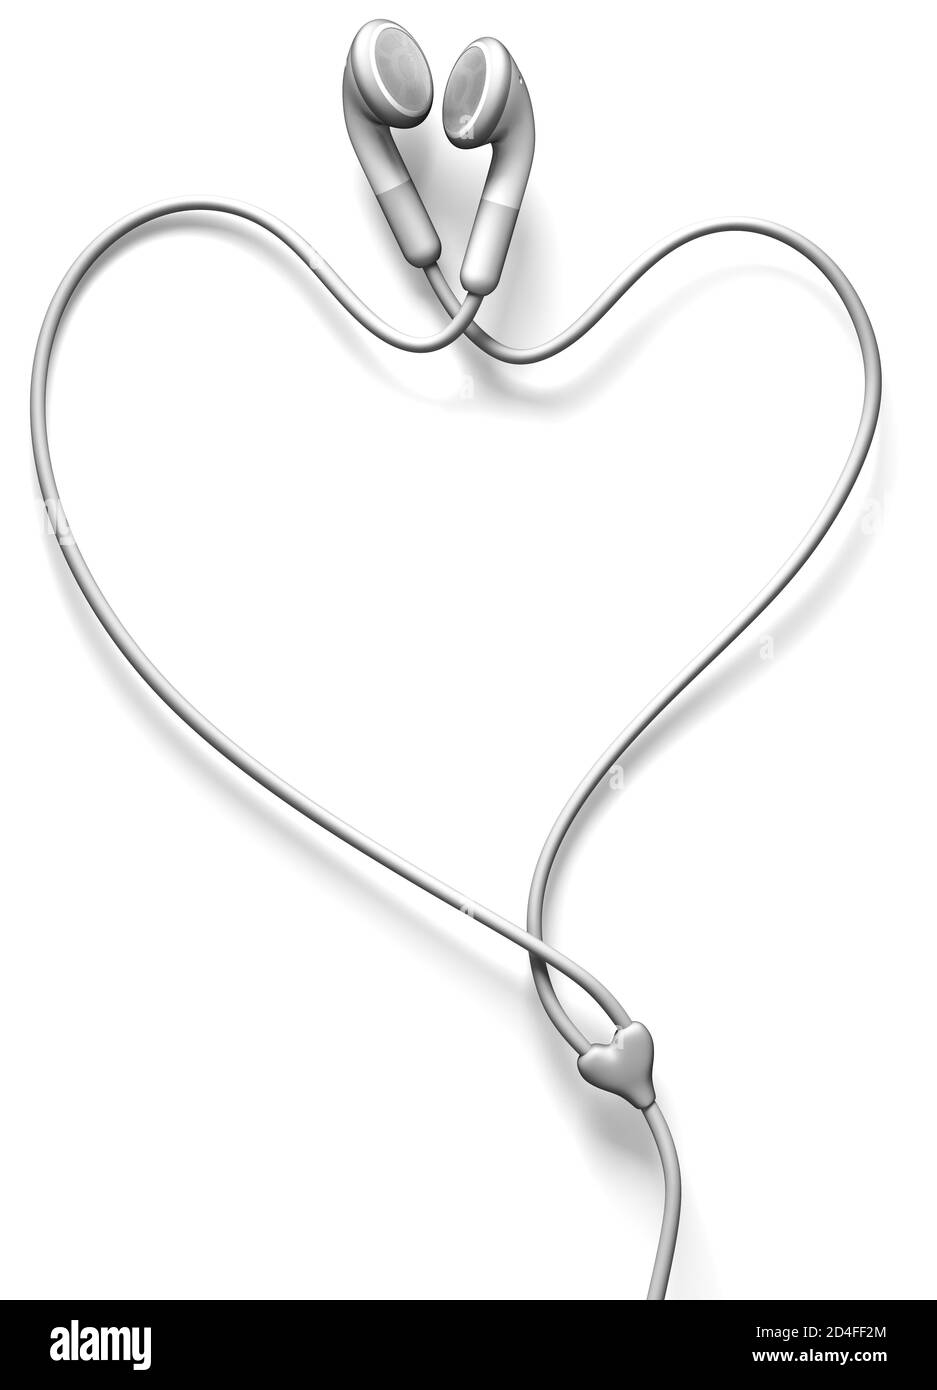 Love music. Ear buds in the shape of a heart. White background, cut out. Headphones. Stock Photo